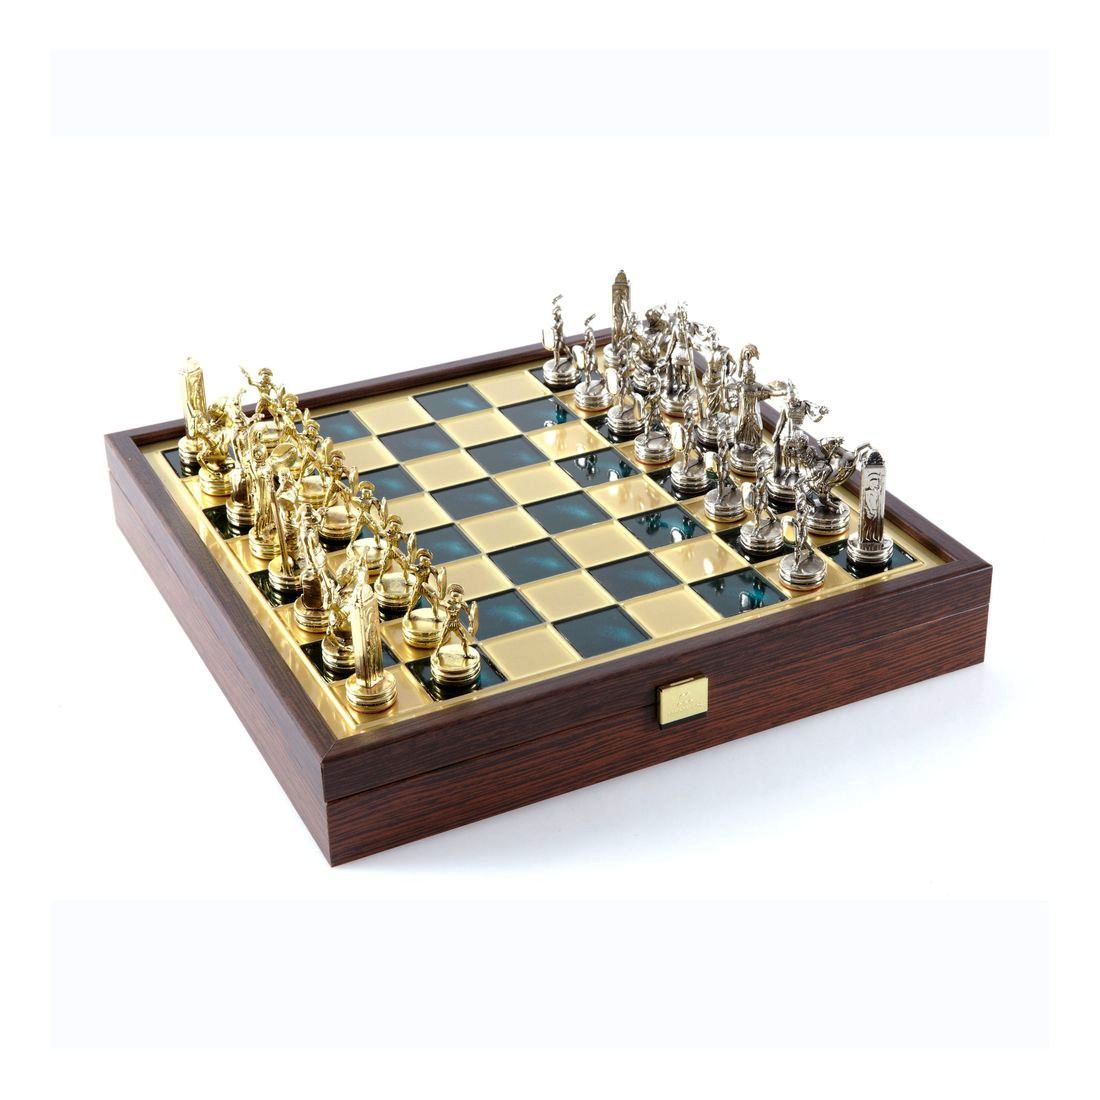 Manopoulos Chess Set Greek Mythology - Antique Turquoise Chessboard in Wooden Box with Gold/Silver Chessmen - Medium (34 x 34 cm)